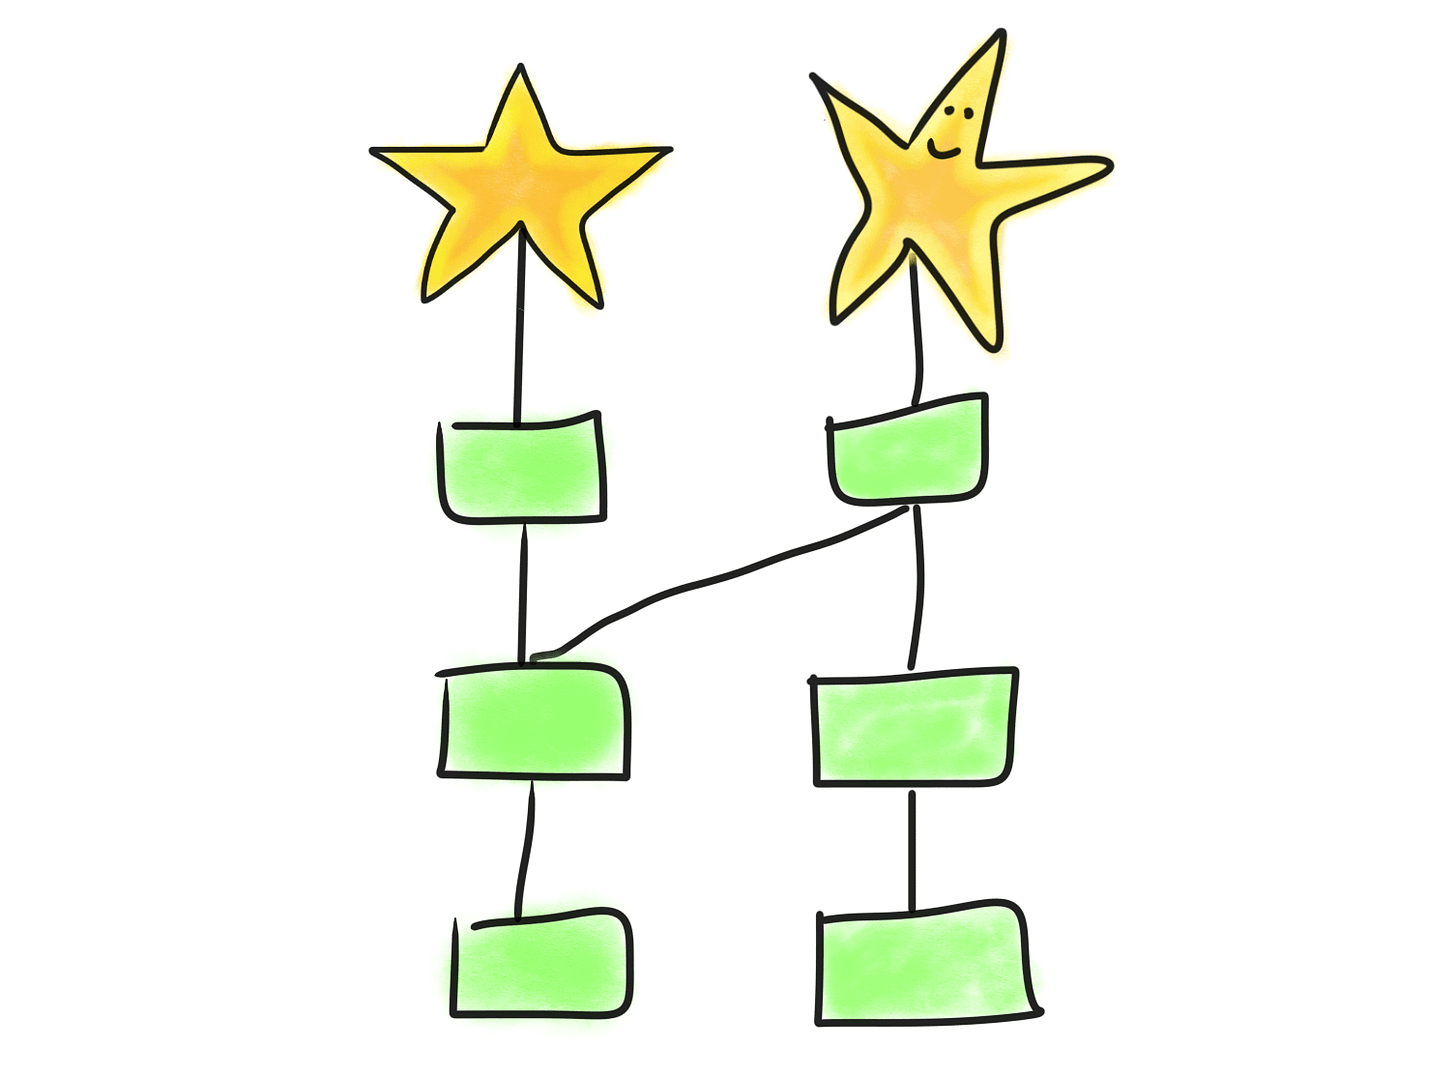 Leveling up in product with the Jobs Tree